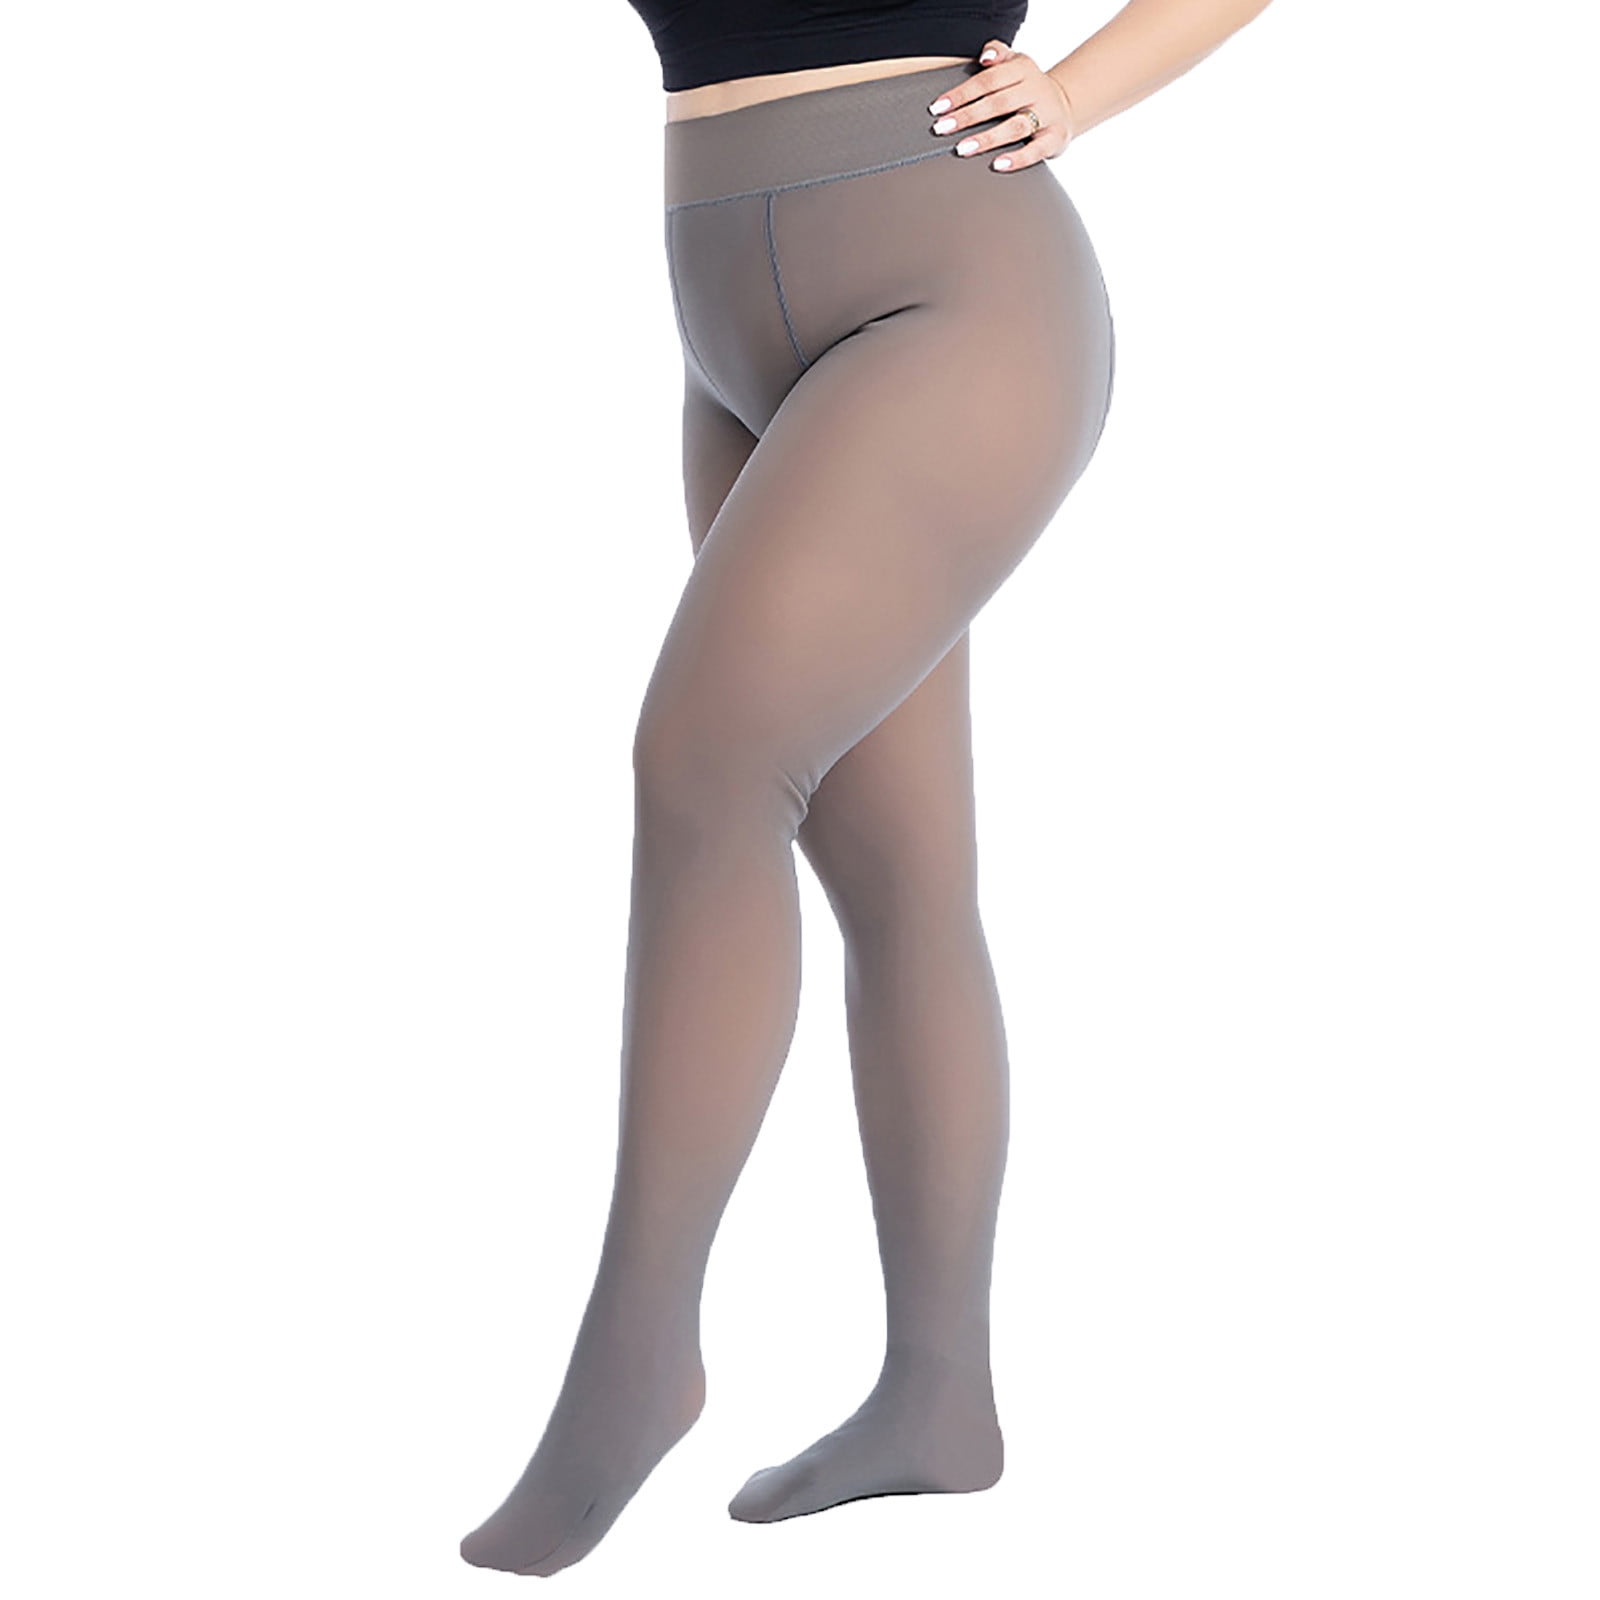 Fake Translucent Nude Tights Fleece Warm Pantyhose Tights for Women Winter  Fleece Lined Tights Legging Plus Size (Gray-A,420g)